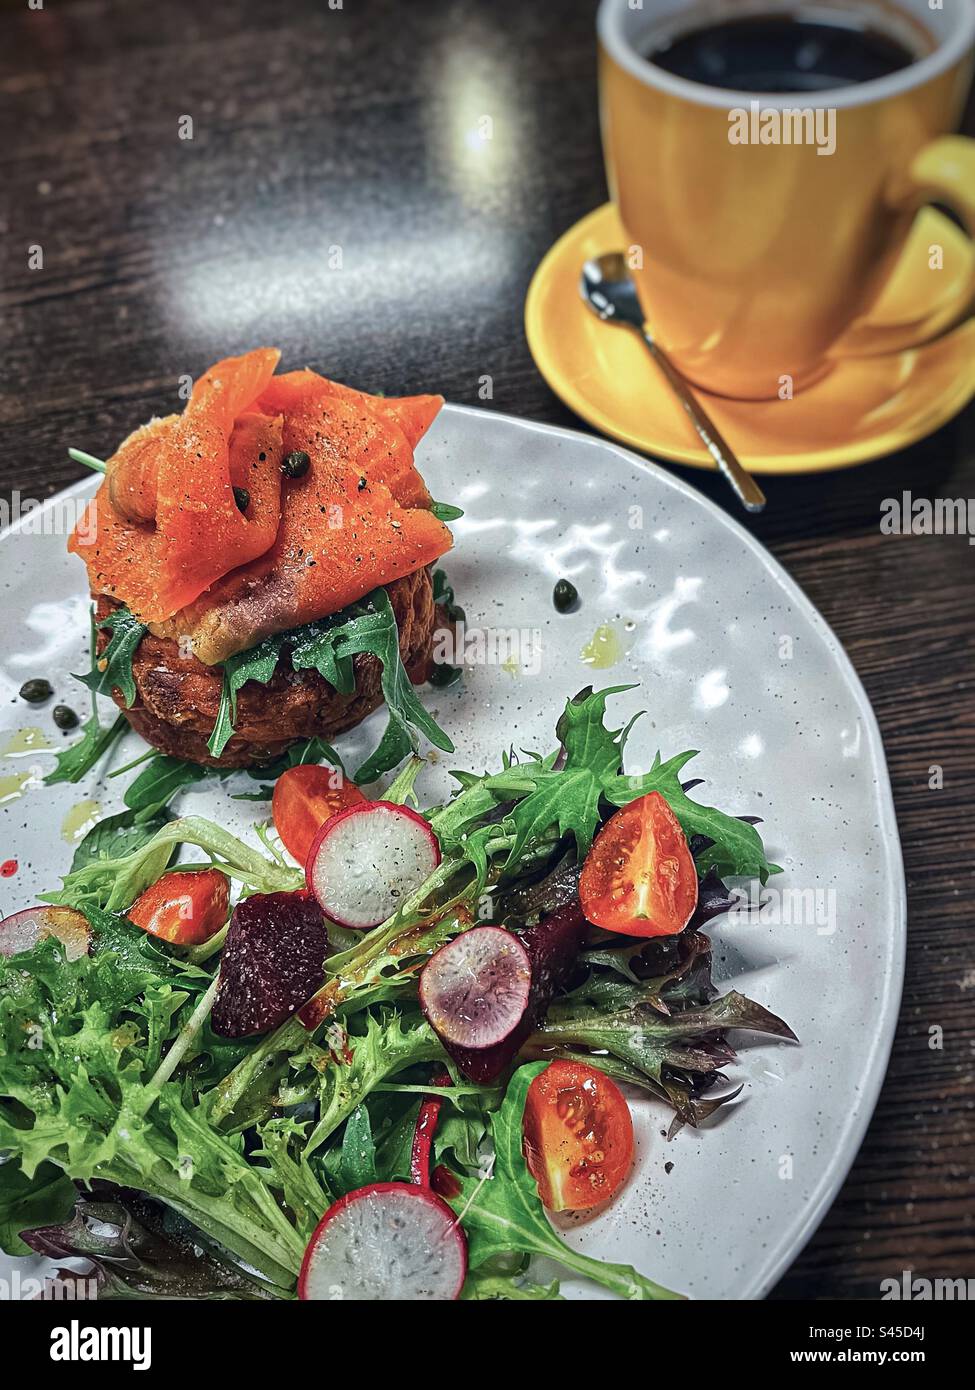 Smoked salmon on hot potato cakes with fresh salad on plate and a yellow cup of coffee on table. Stock Photo